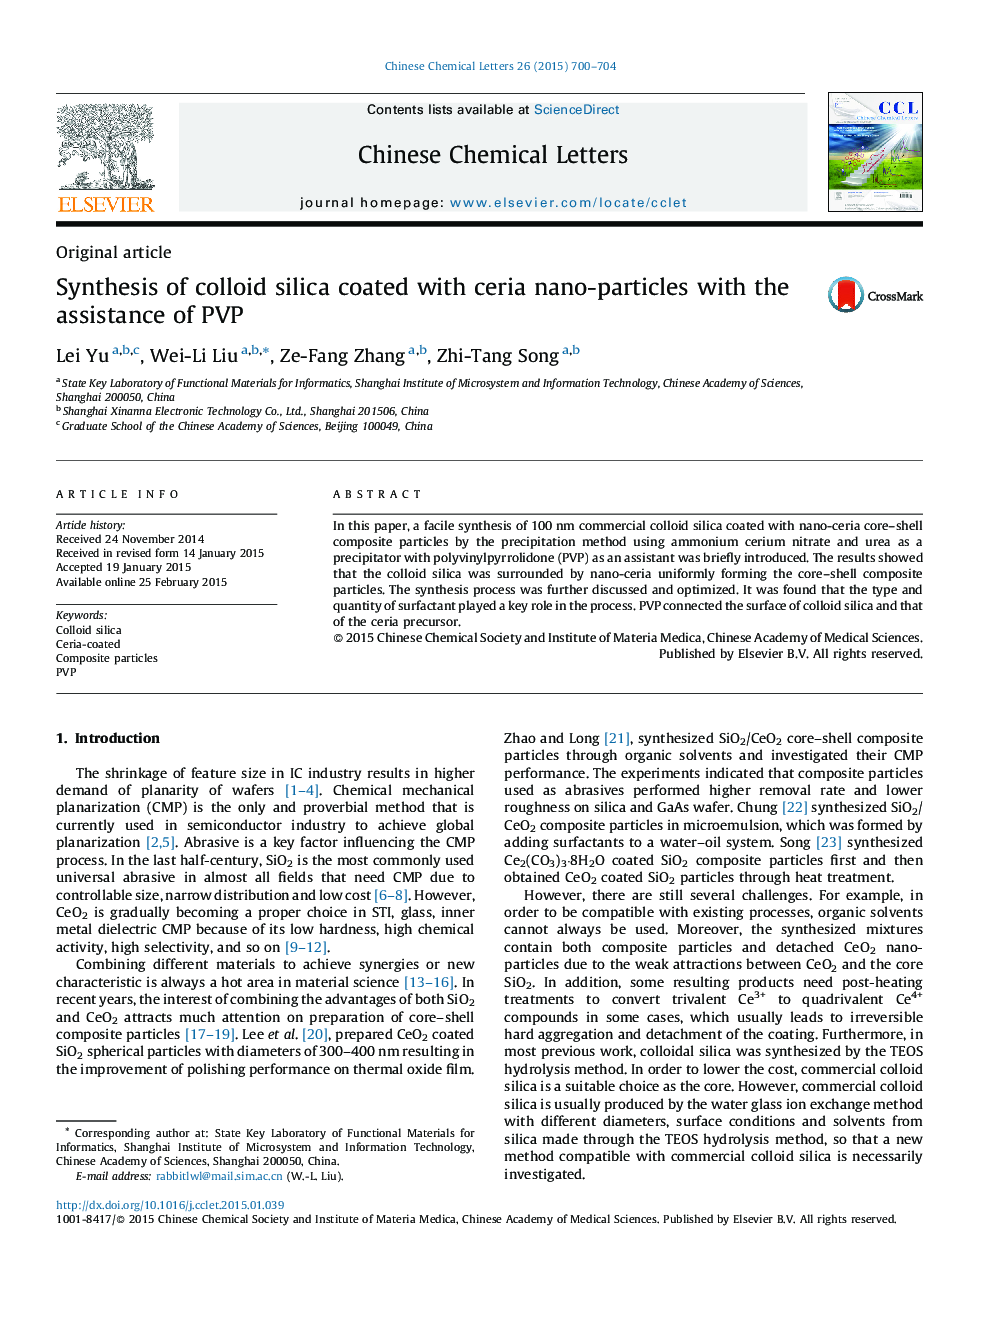 Synthesis of colloid silica coated with ceria nano-particles with the assistance of PVP